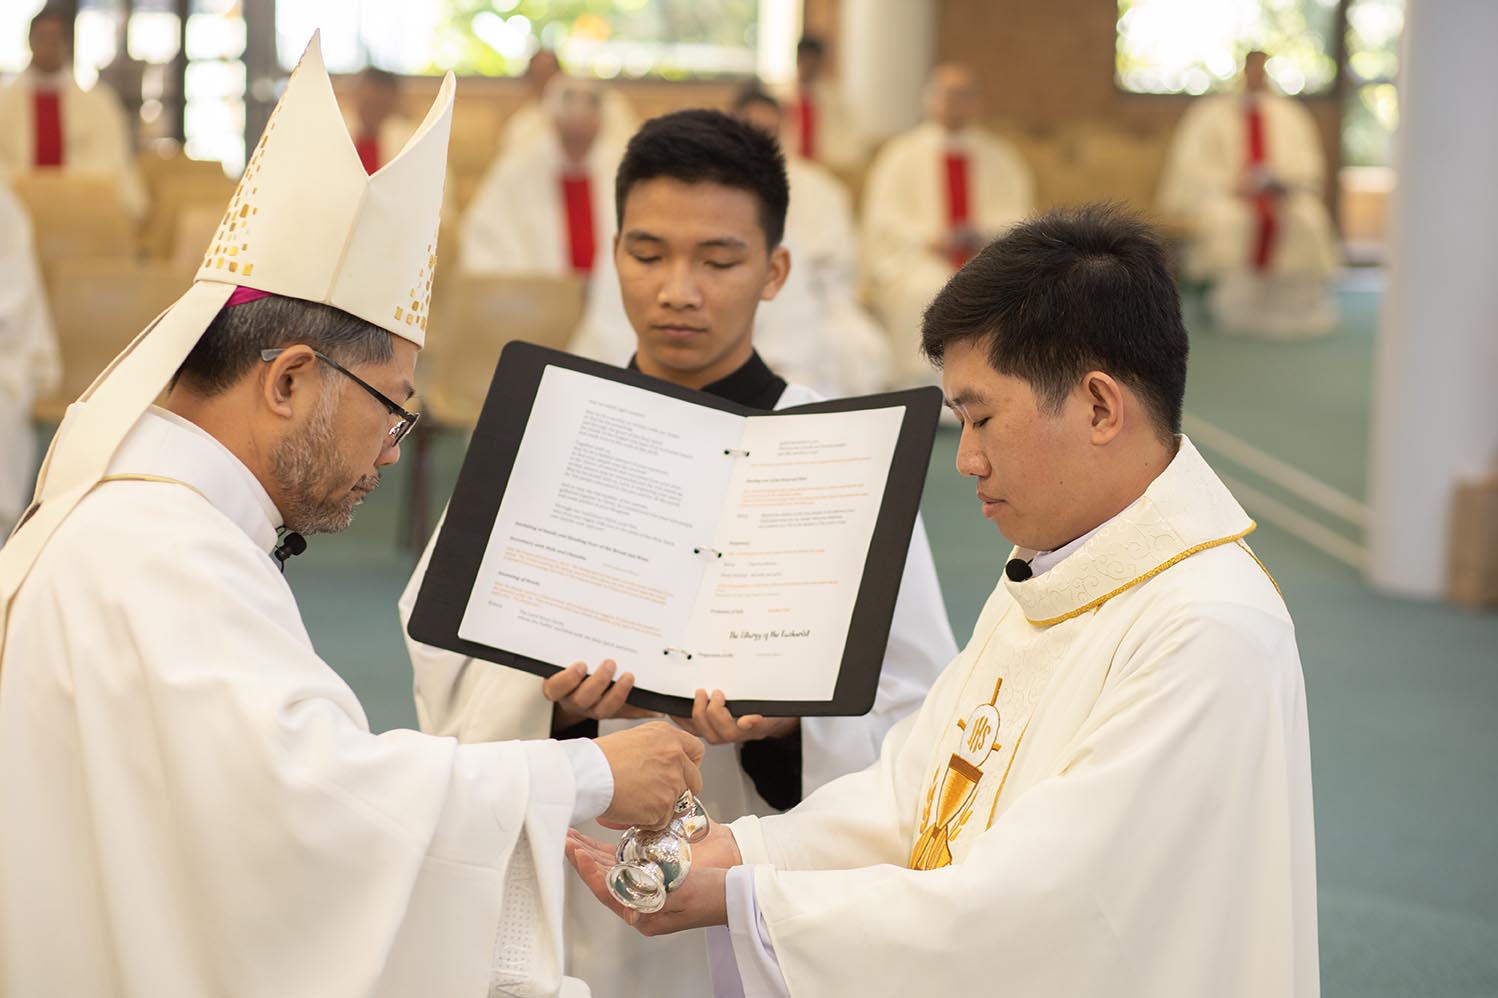 Fr Quang Tuyen Pham OSA, ordained to the Priesthood